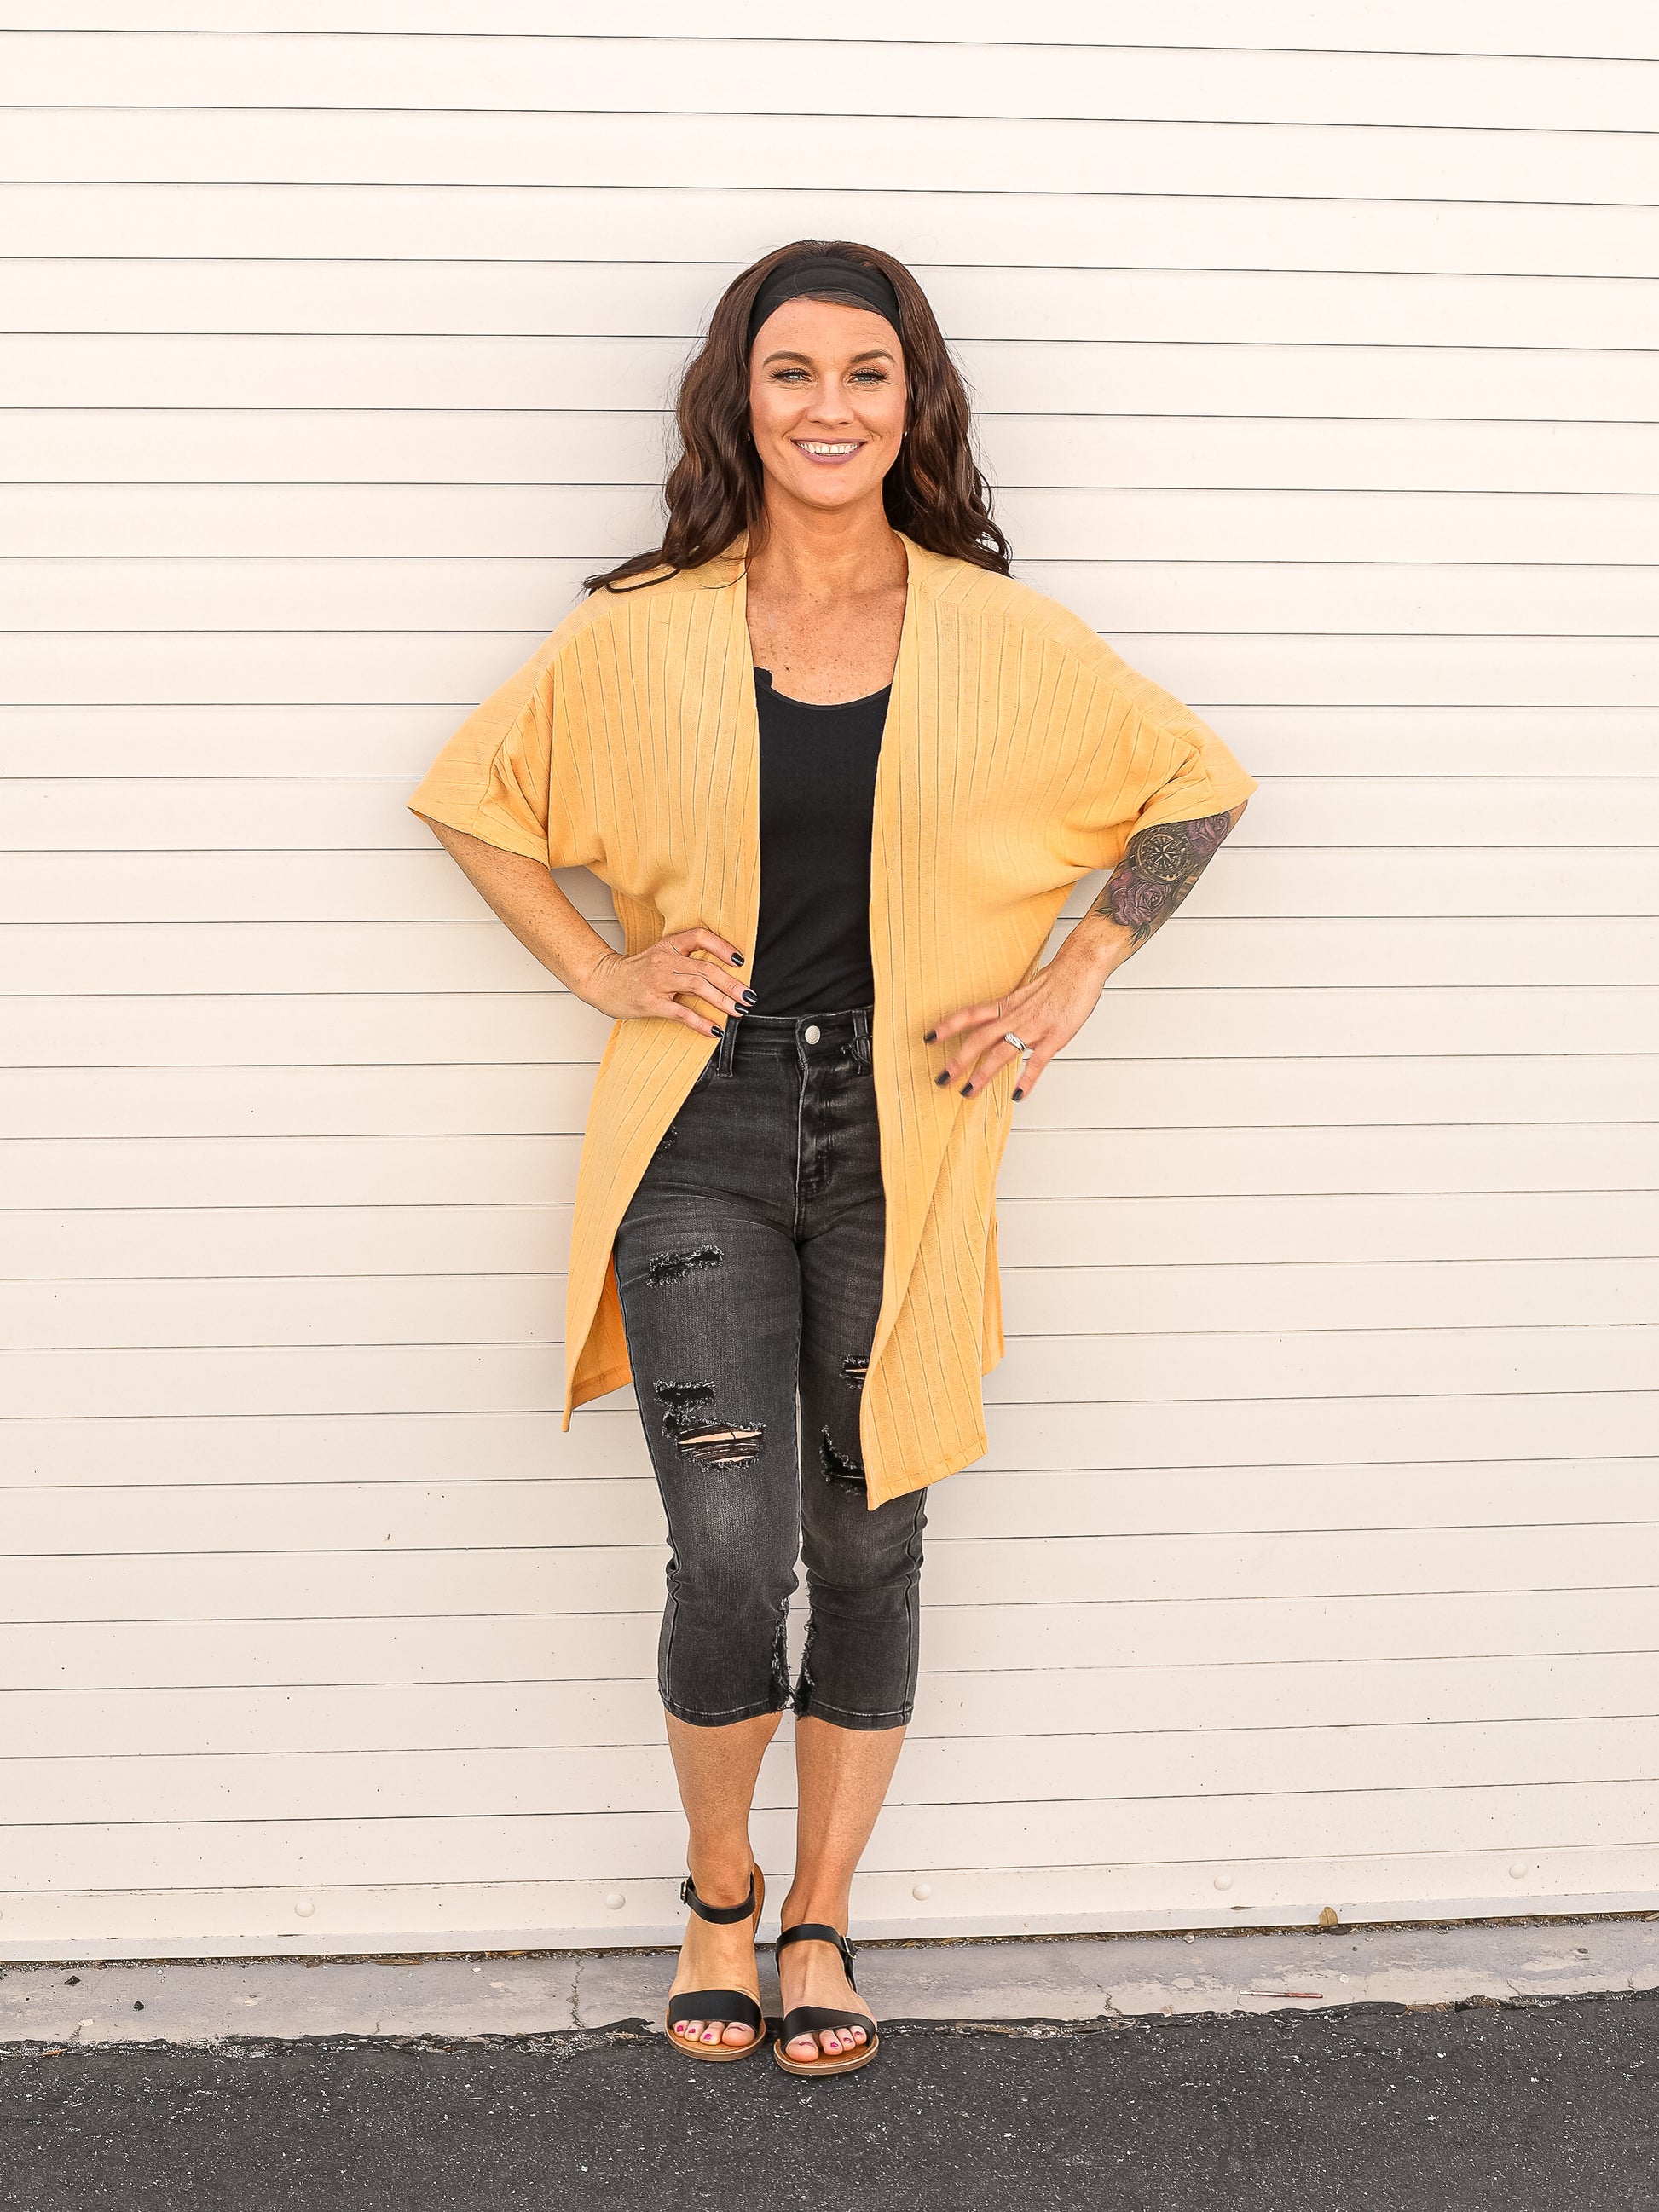 Butternut colored ribbed long open cardigan. Styled with capris and a tank top.